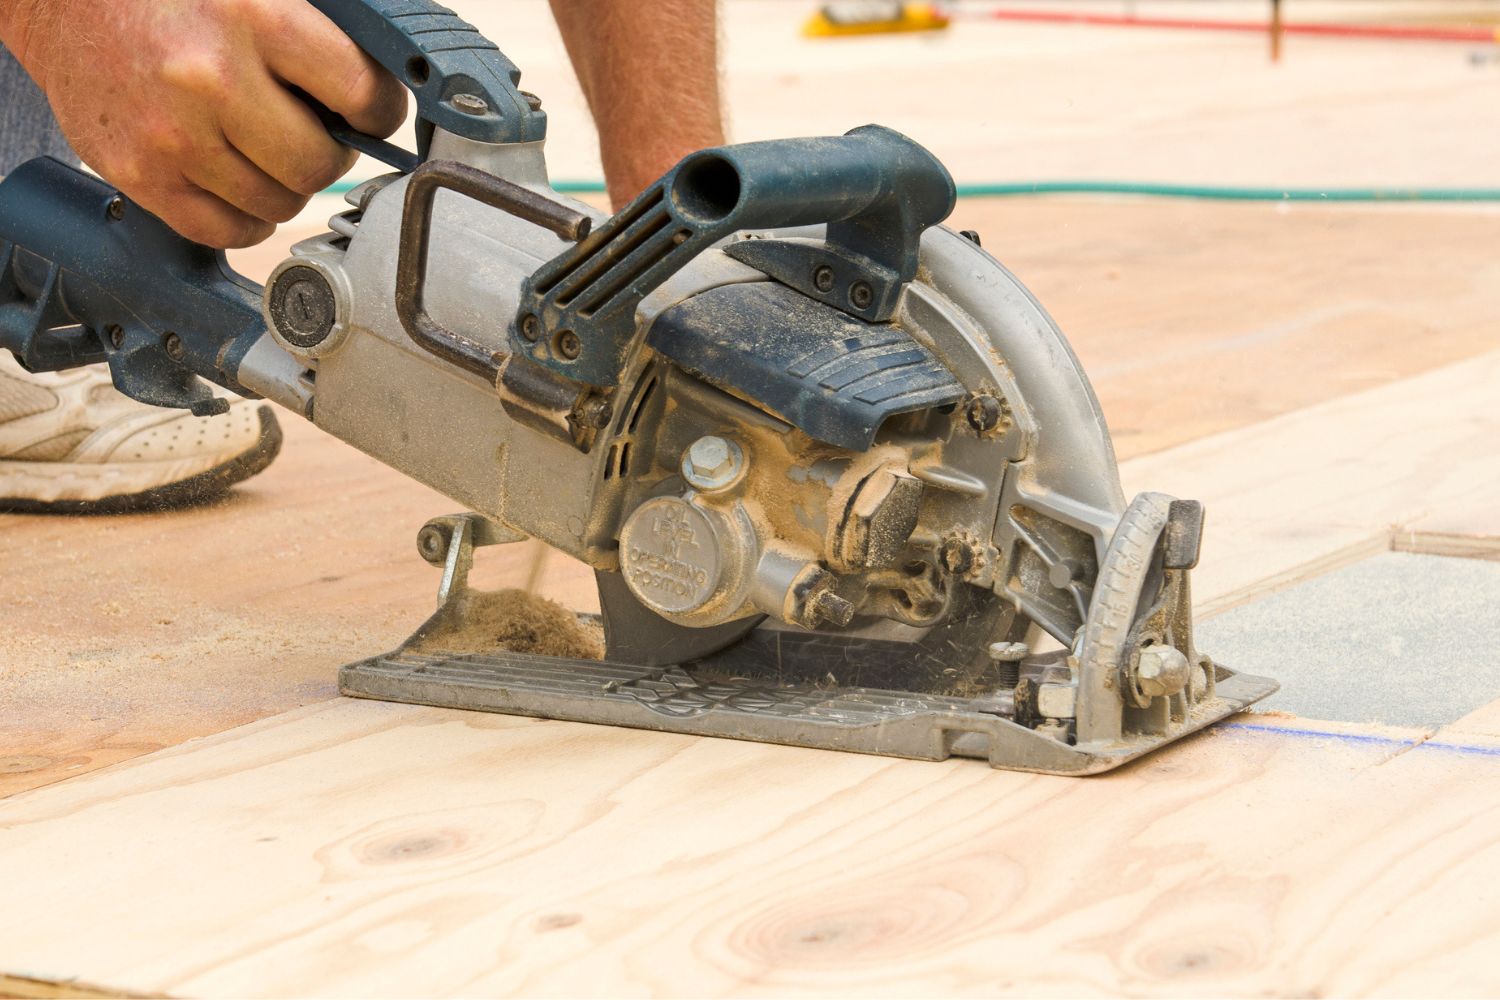 Cost to Replace a Subfloor